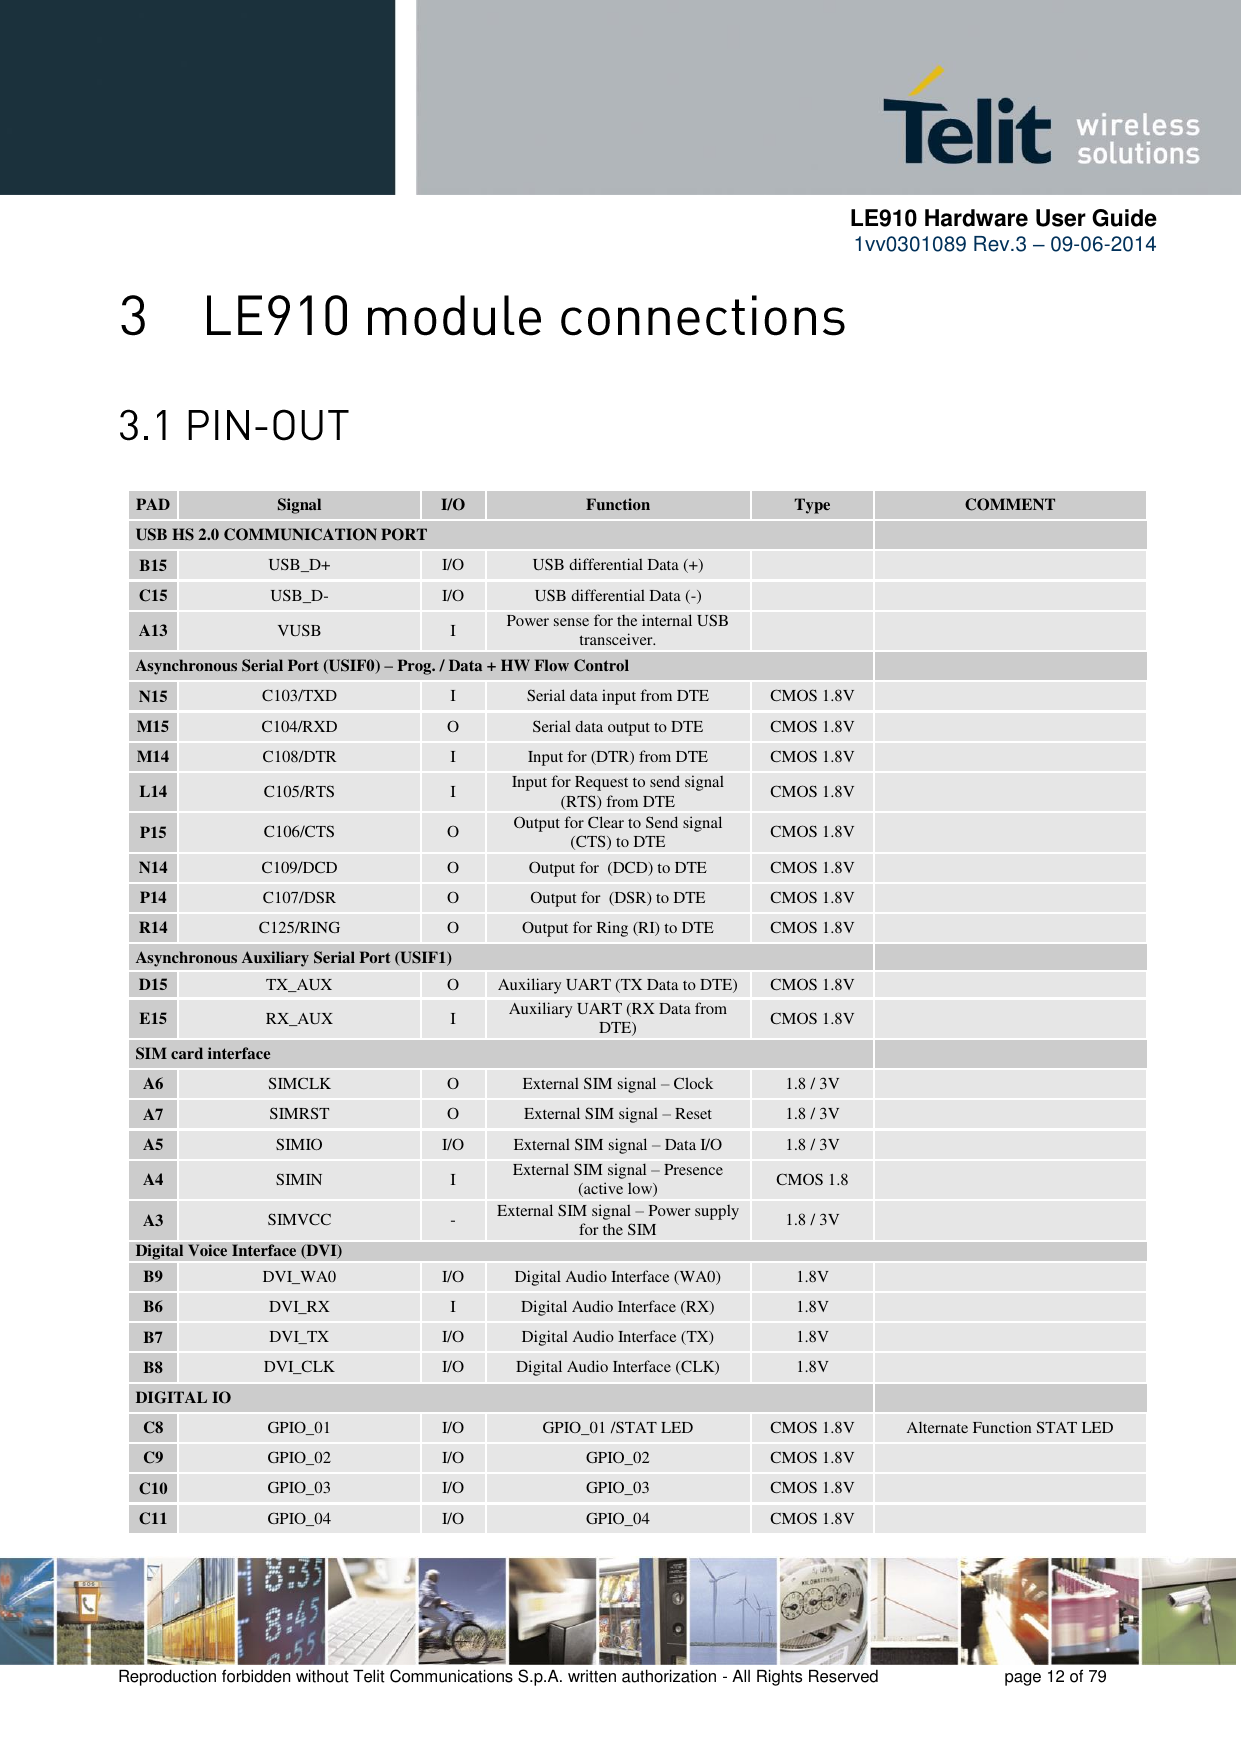      LE910 Hardware User Guide 1vv0301089 Rev.3 – 09-06-2014    Reproduction forbidden without Telit Communications S.p.A. written authorization - All Rights Reserved    page 12 of 79    PAD Signal I/O Function Type COMMENT USB HS 2.0 COMMUNICATION PORT    B15 USB_D+ I/O USB differential Data (+)   C15 USB_D- I/O USB differential Data (-)   A13 VUSB I Power sense for the internal USB transceiver.   Asynchronous Serial Port (USIF0) – Prog. / Data + HW Flow Control   N15 C103/TXD I Serial data input from DTE CMOS 1.8V  M15 C104/RXD O Serial data output to DTE CMOS 1.8V  M14 C108/DTR I Input for (DTR) from DTE CMOS 1.8V  L14 C105/RTS I Input for Request to send signal (RTS) from DTE CMOS 1.8V  P15 C106/CTS O Output for Clear to Send signal (CTS) to DTE CMOS 1.8V  N14 C109/DCD O Output for  (DCD) to DTE CMOS 1.8V  P14 C107/DSR O Output for  (DSR) to DTE CMOS 1.8V  R14 C125/RING O Output for Ring (RI) to DTE CMOS 1.8V  Asynchronous Auxiliary Serial Port (USIF1)    D15 TX_AUX O Auxiliary UART (TX Data to DTE) CMOS 1.8V  E15 RX_AUX I Auxiliary UART (RX Data from DTE) CMOS 1.8V  SIM card interface     A6 SIMCLK O External SIM signal – Clock 1.8 / 3V  A7 SIMRST O External SIM signal – Reset 1.8 / 3V  A5 SIMIO I/O External SIM signal – Data I/O 1.8 / 3V  A4 SIMIN I External SIM signal – Presence (active low) CMOS 1.8  A3 SIMVCC - External SIM signal – Power supply for the SIM 1.8 / 3V  Digital Voice Interface (DVI)  B9 DVI_WA0 I/O Digital Audio Interface (WA0) 1.8V  B6 DVI_RX I Digital Audio Interface (RX) 1.8V  B7 DVI_TX I/O Digital Audio Interface (TX) 1.8V  B8 DVI_CLK I/O Digital Audio Interface (CLK) 1.8V  DIGITAL IO     C8 GPIO_01 I/O GPIO_01 /STAT LED CMOS 1.8V Alternate Function STAT LED C9 GPIO_02 I/O GPIO_02 CMOS 1.8V  C10 GPIO_03 I/O GPIO_03  CMOS 1.8V  C11 GPIO_04 I/O GPIO_04 CMOS 1.8V  